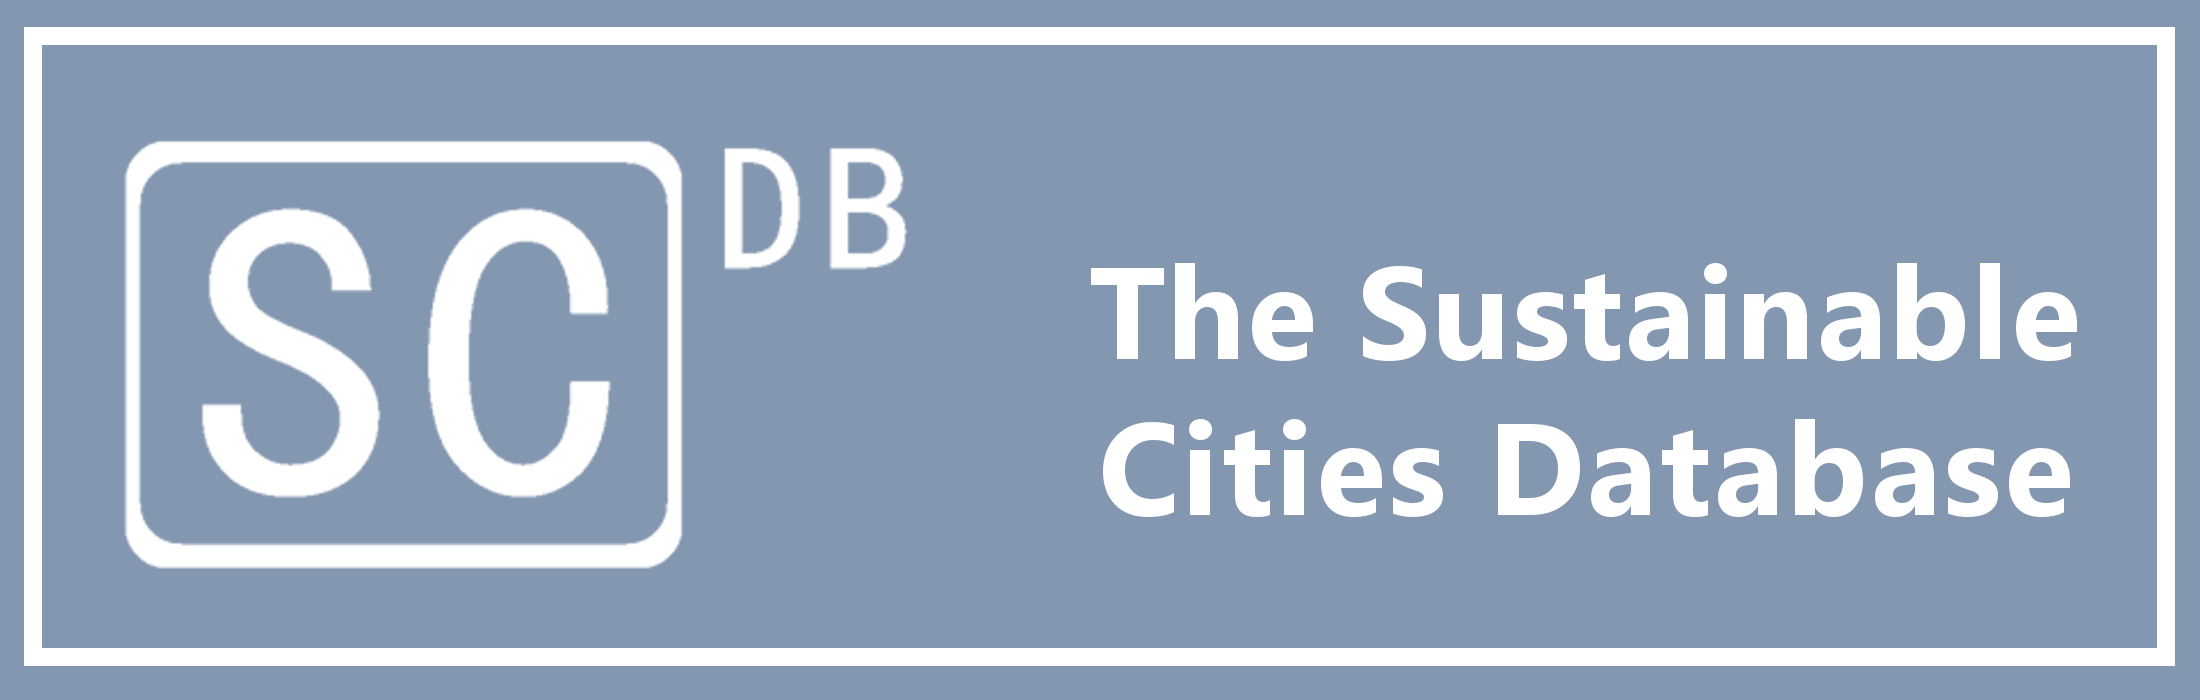 The Sustainable Cities Database